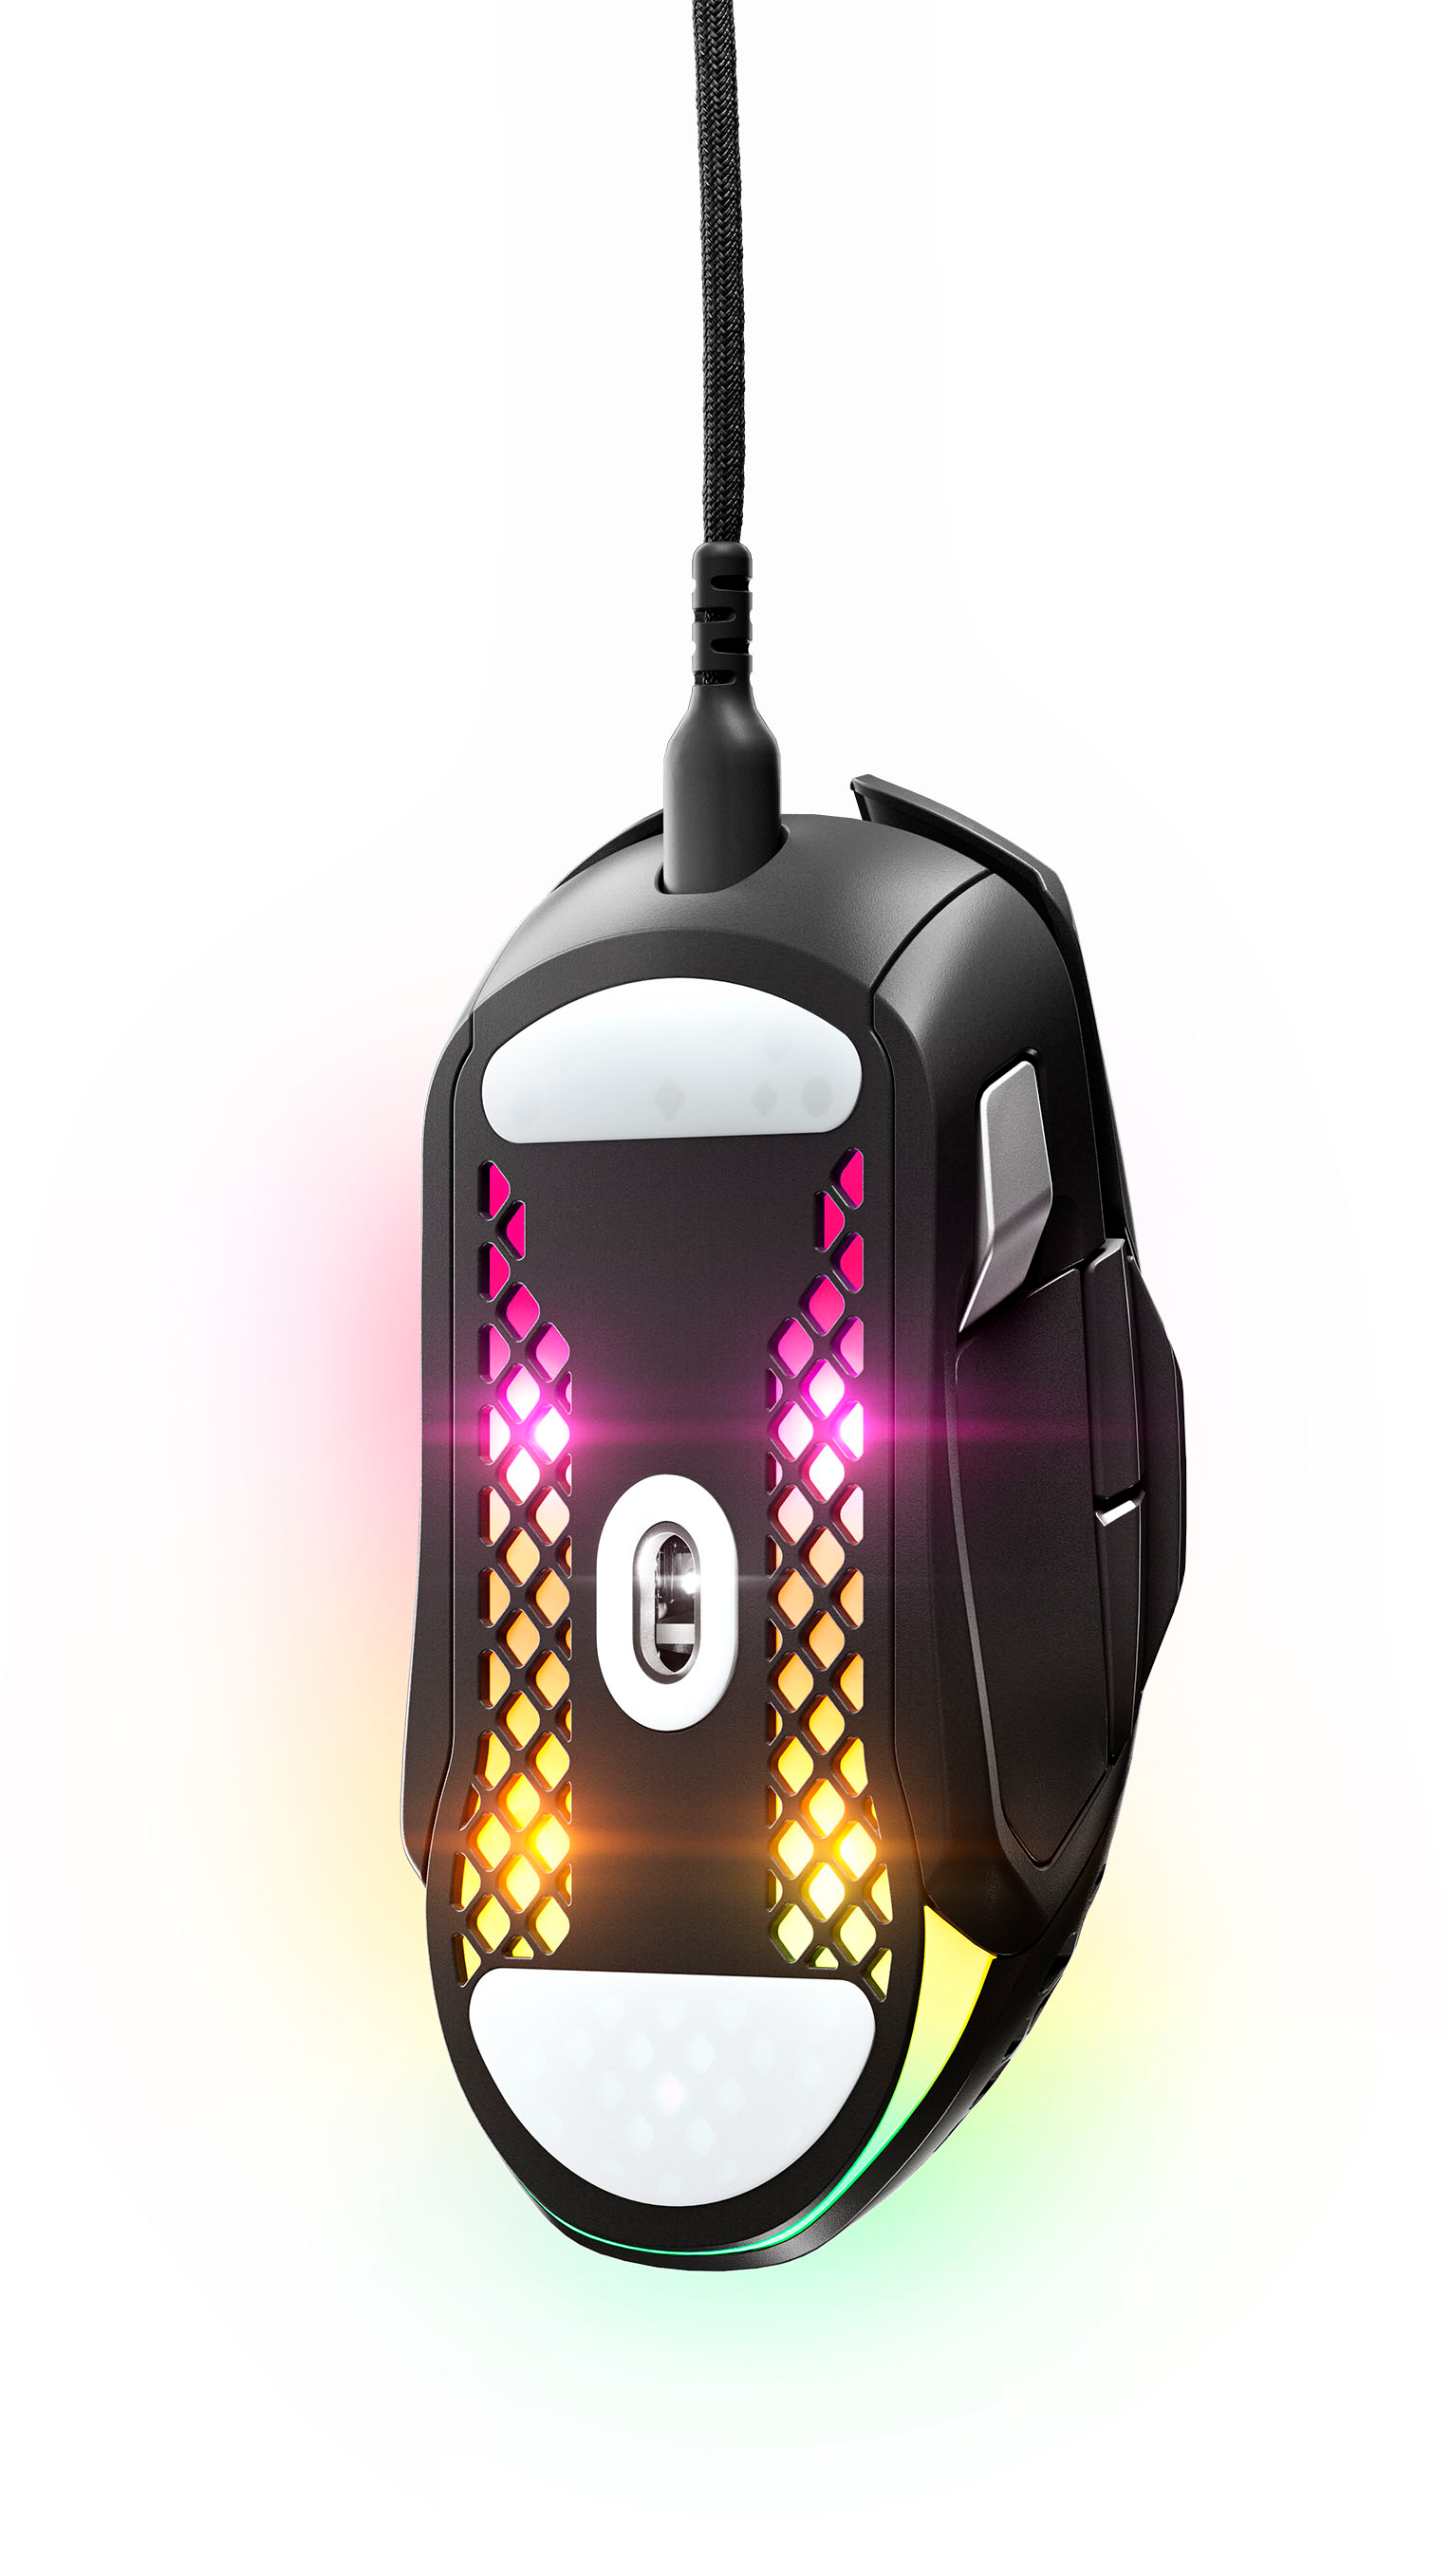 Back View: SteelSeries - Aerox 5 Lightweight Wired Optical Gaming Mouse With 9 Programmble Buttons - Black